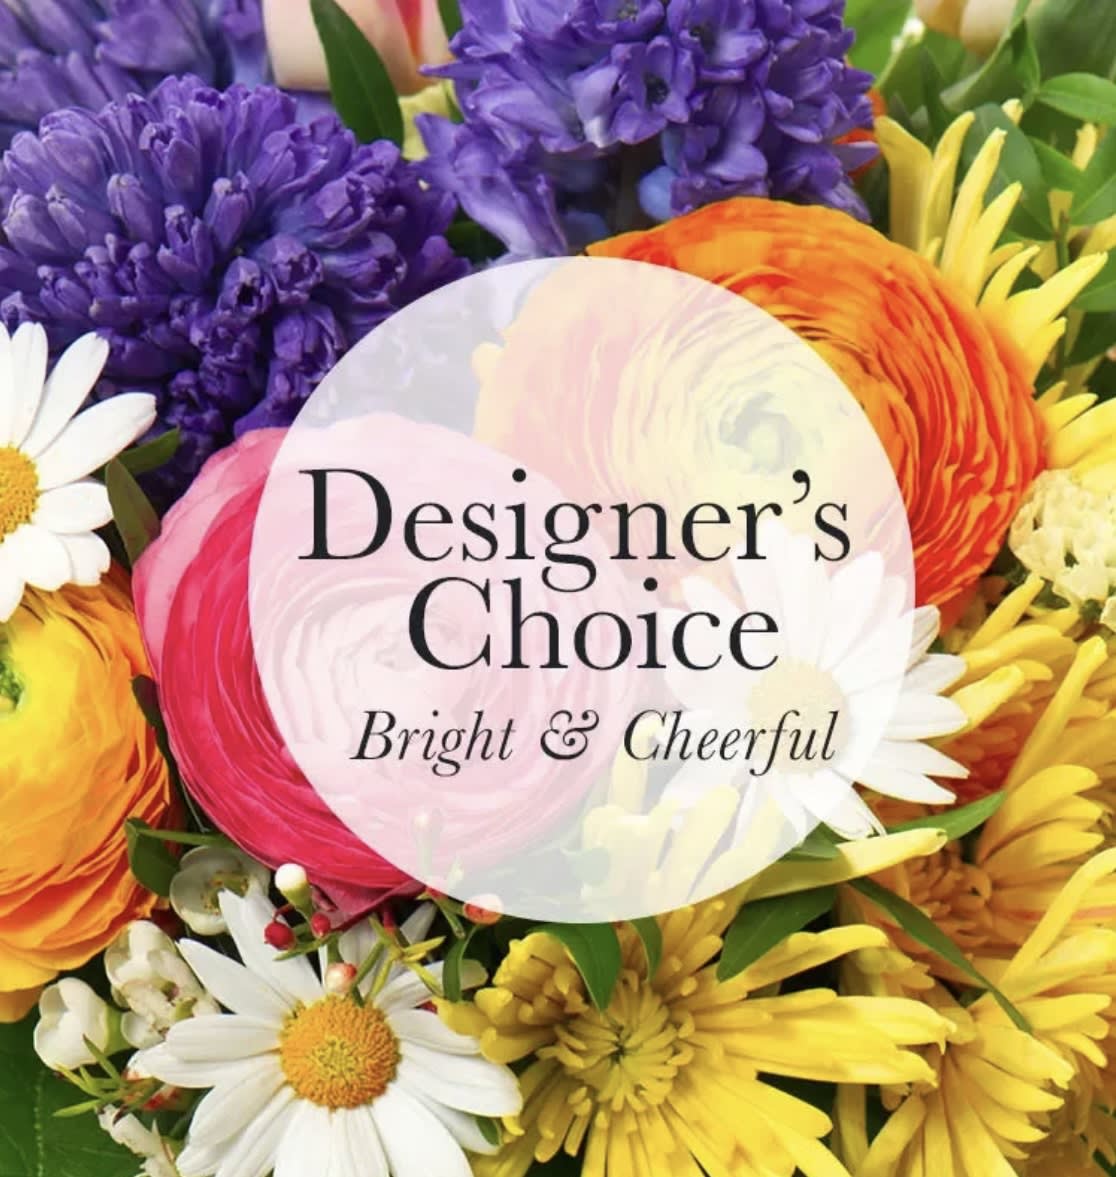 Designer's Choice Bright &amp; Cheerful - This garden style design features a beautiful collection of cheery, brightly colored blooms in a vase.   If this arrangement needs to be pet friendly please specify in the special instructions. Thanks!